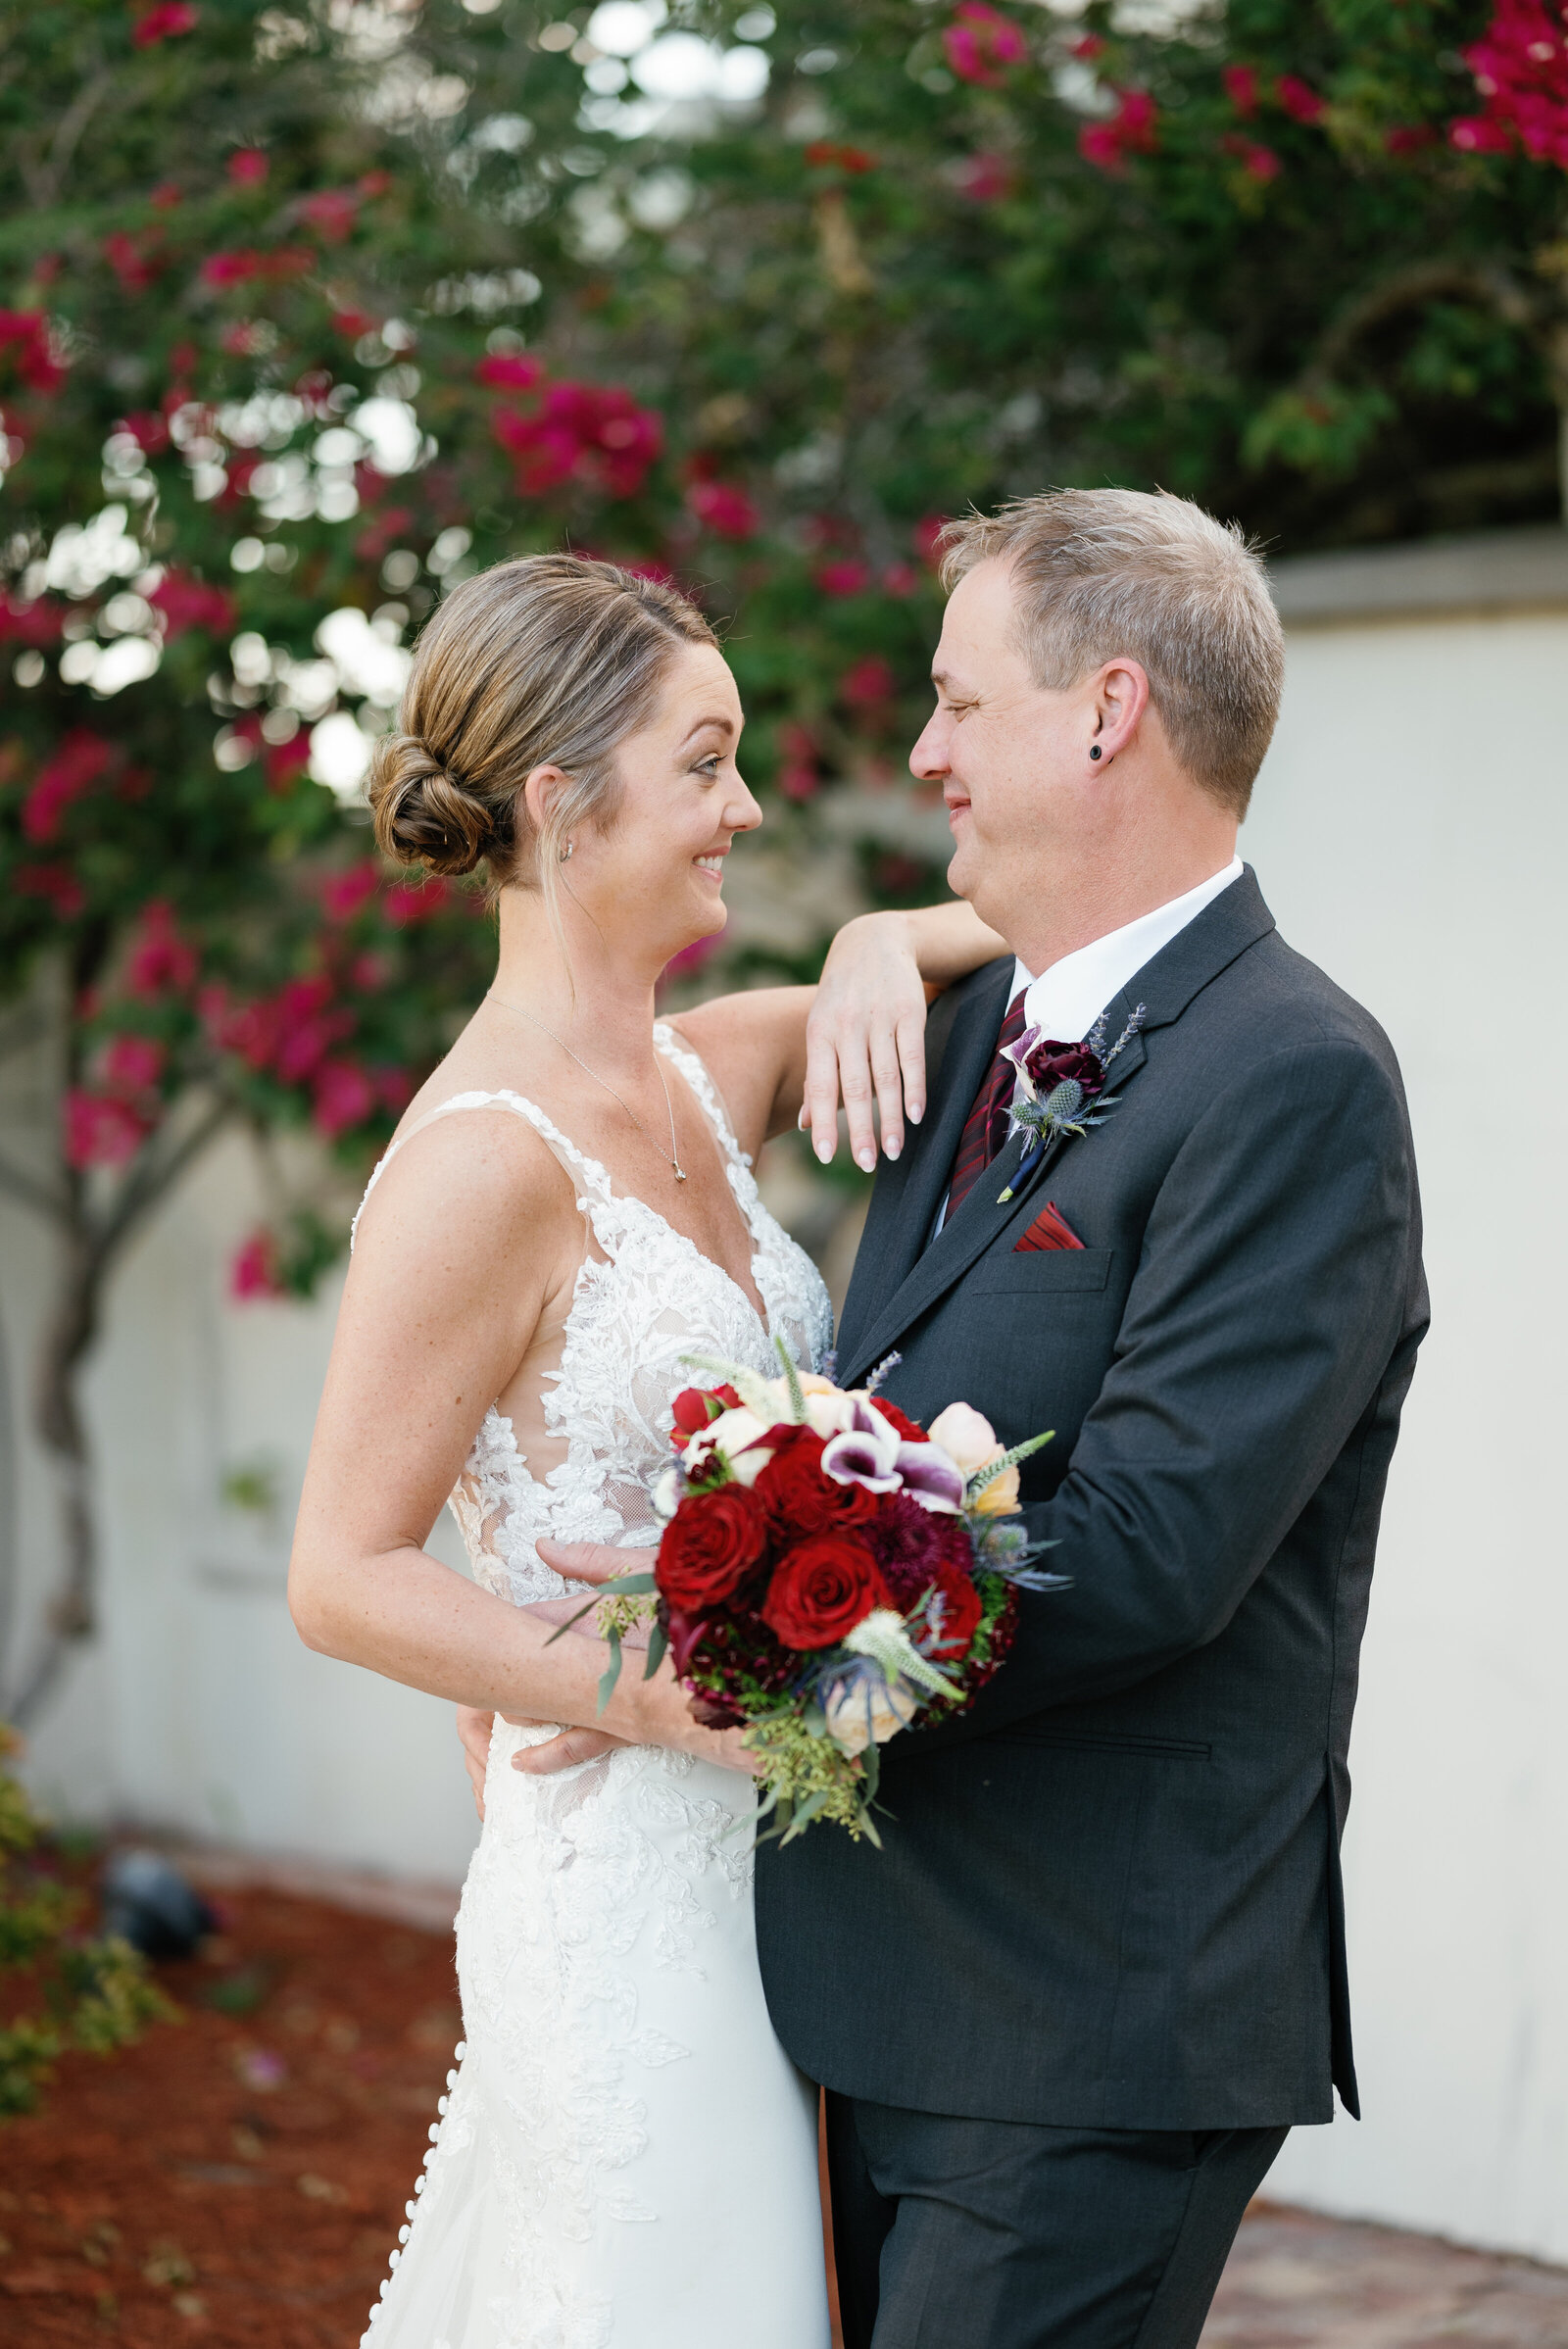 Bride and groom facing each other and smiling. Her left arm is resting on his shoulder and she is holding her wedding bouquet in her right hand. His hands are on her waist